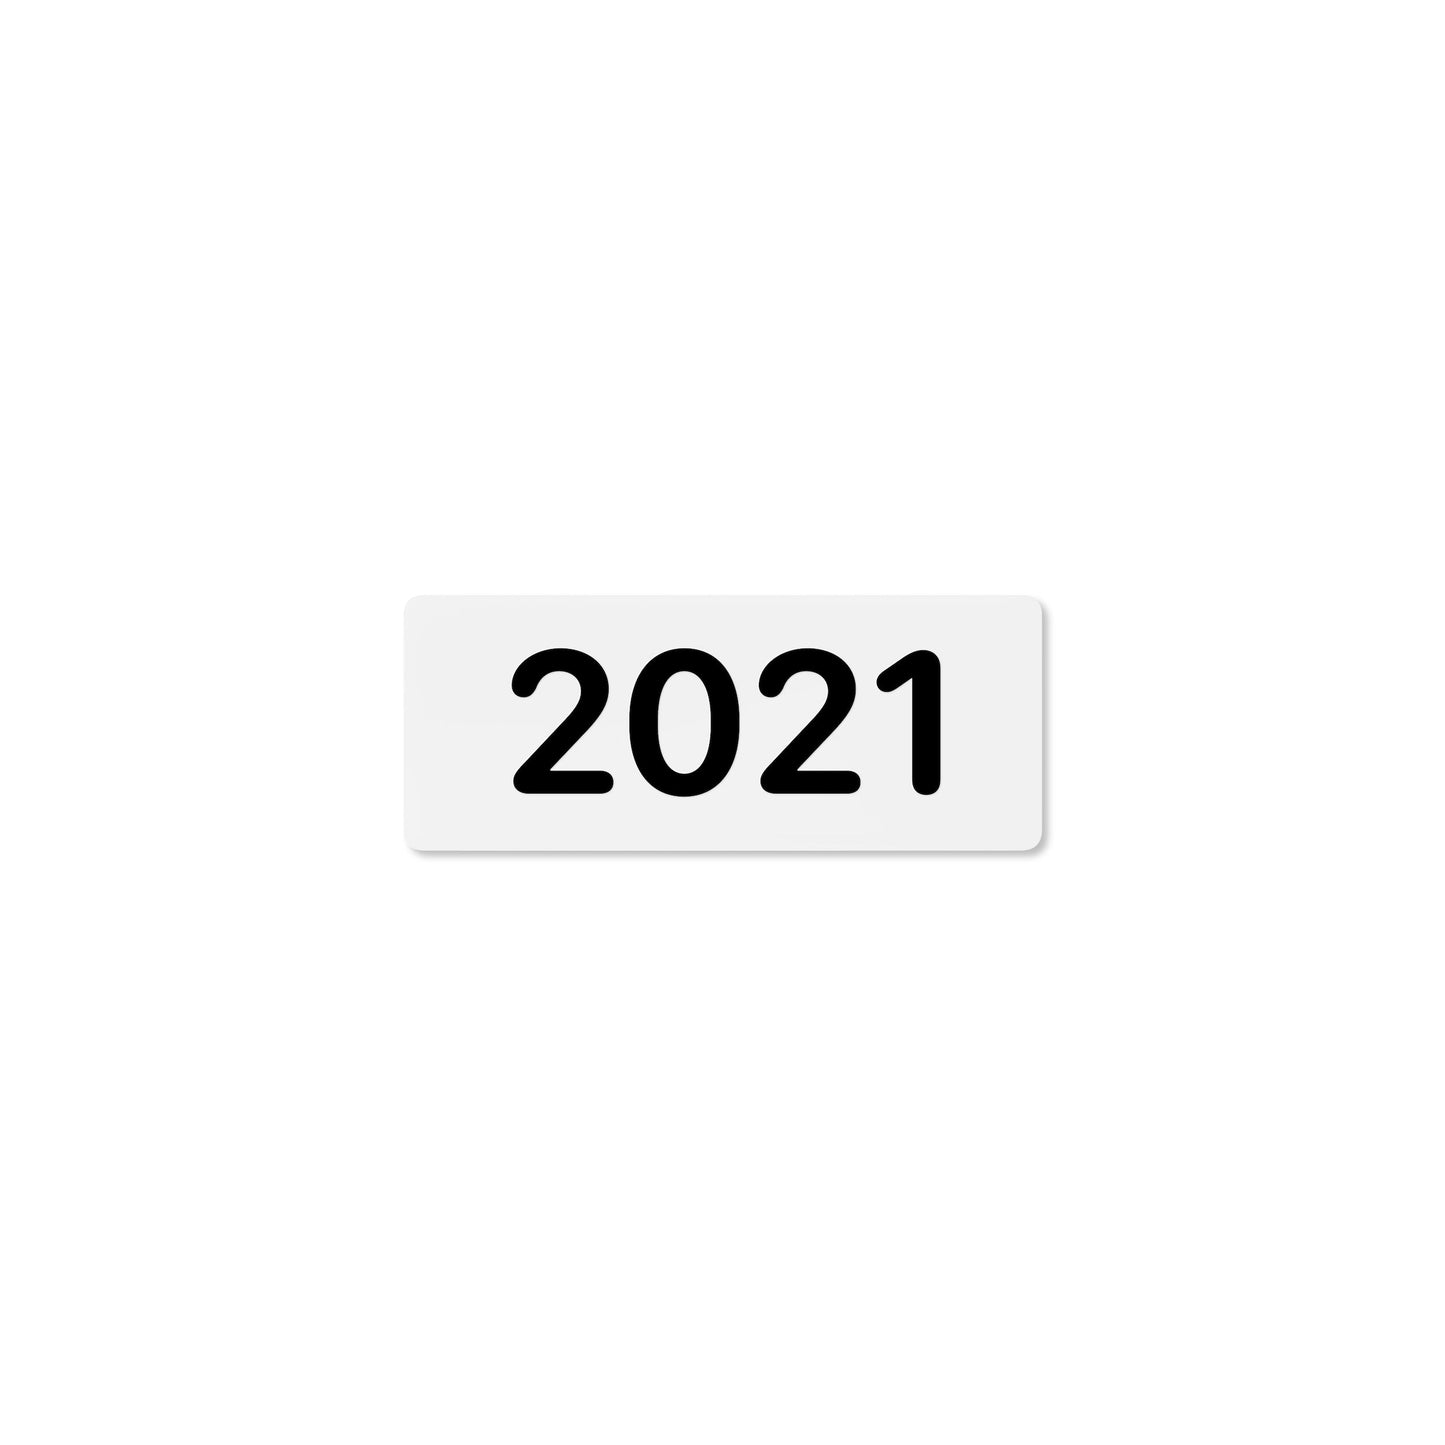 Numeral 2021